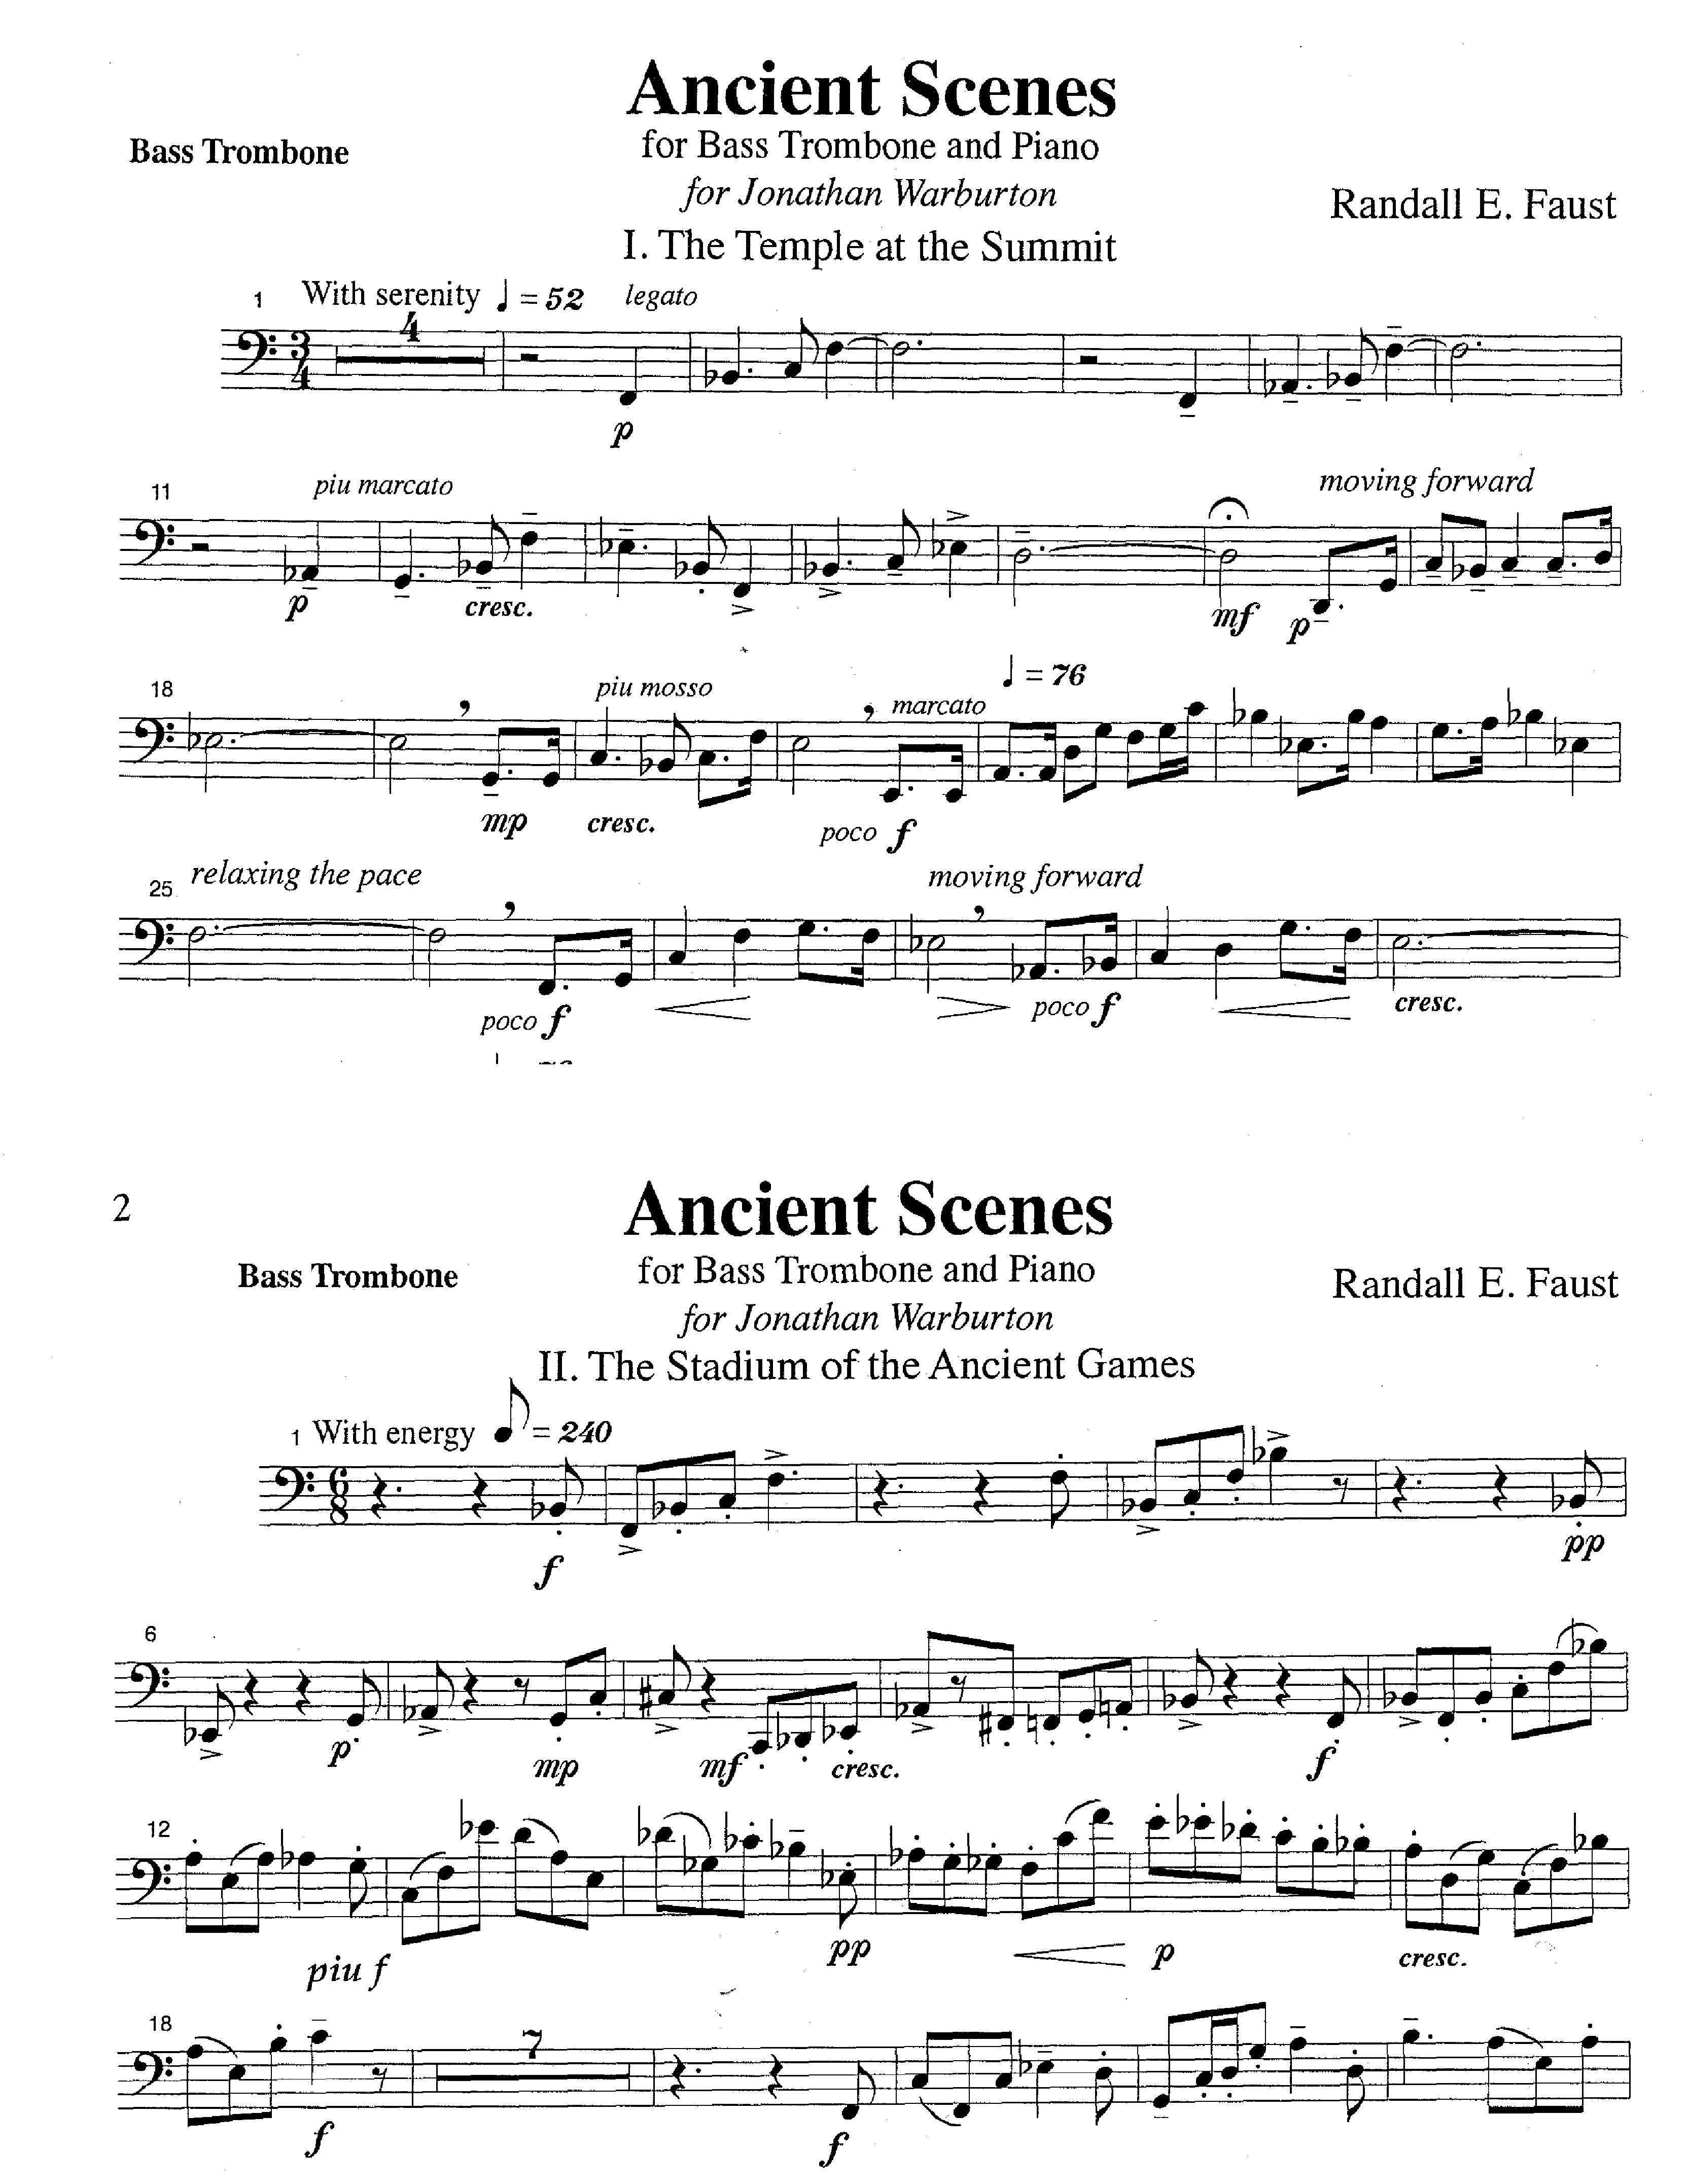 Ancient Scenes for Bass Trombone and Piano